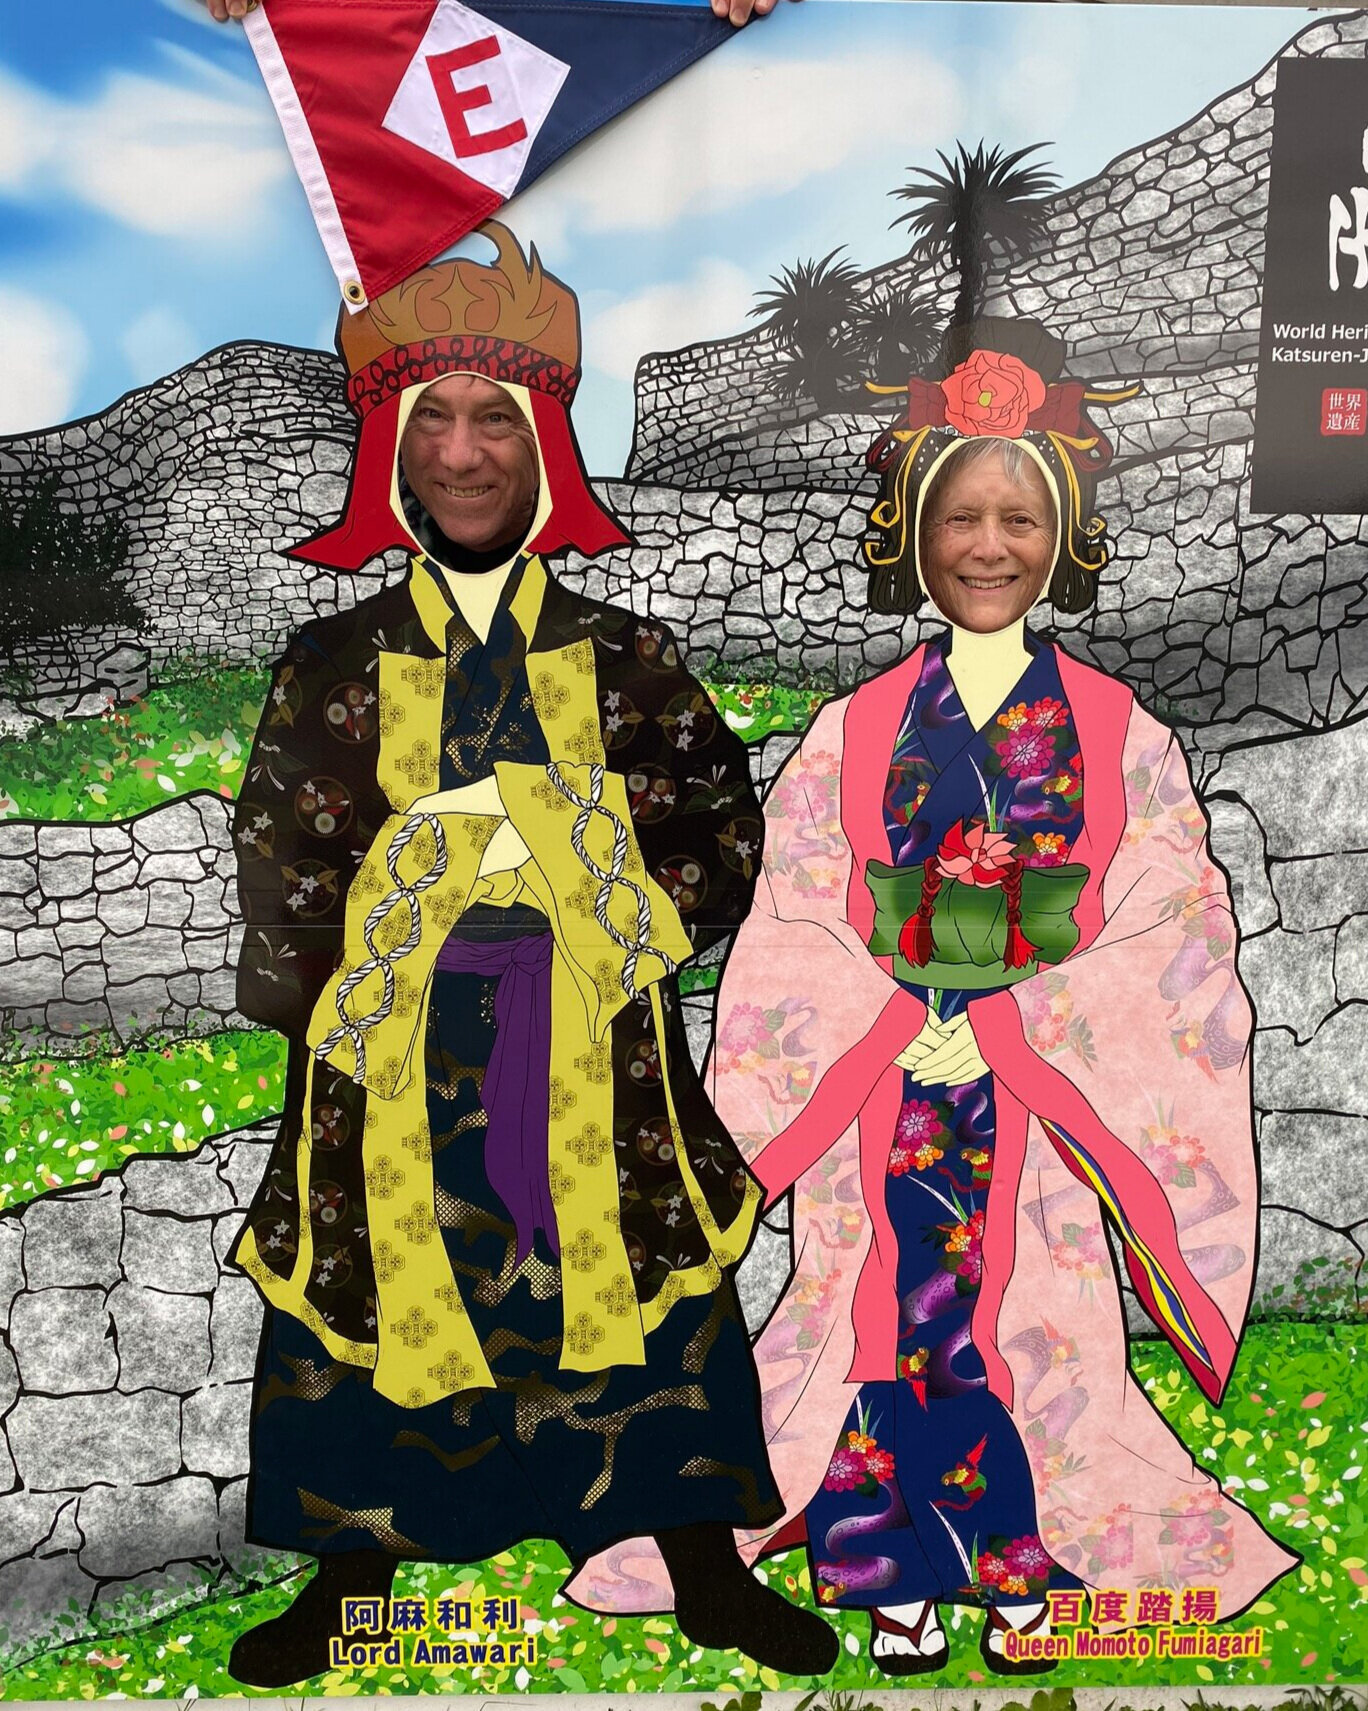  More EYC pride at Katsuren Castle in Okinawa, Japan by Bill and Vicky 